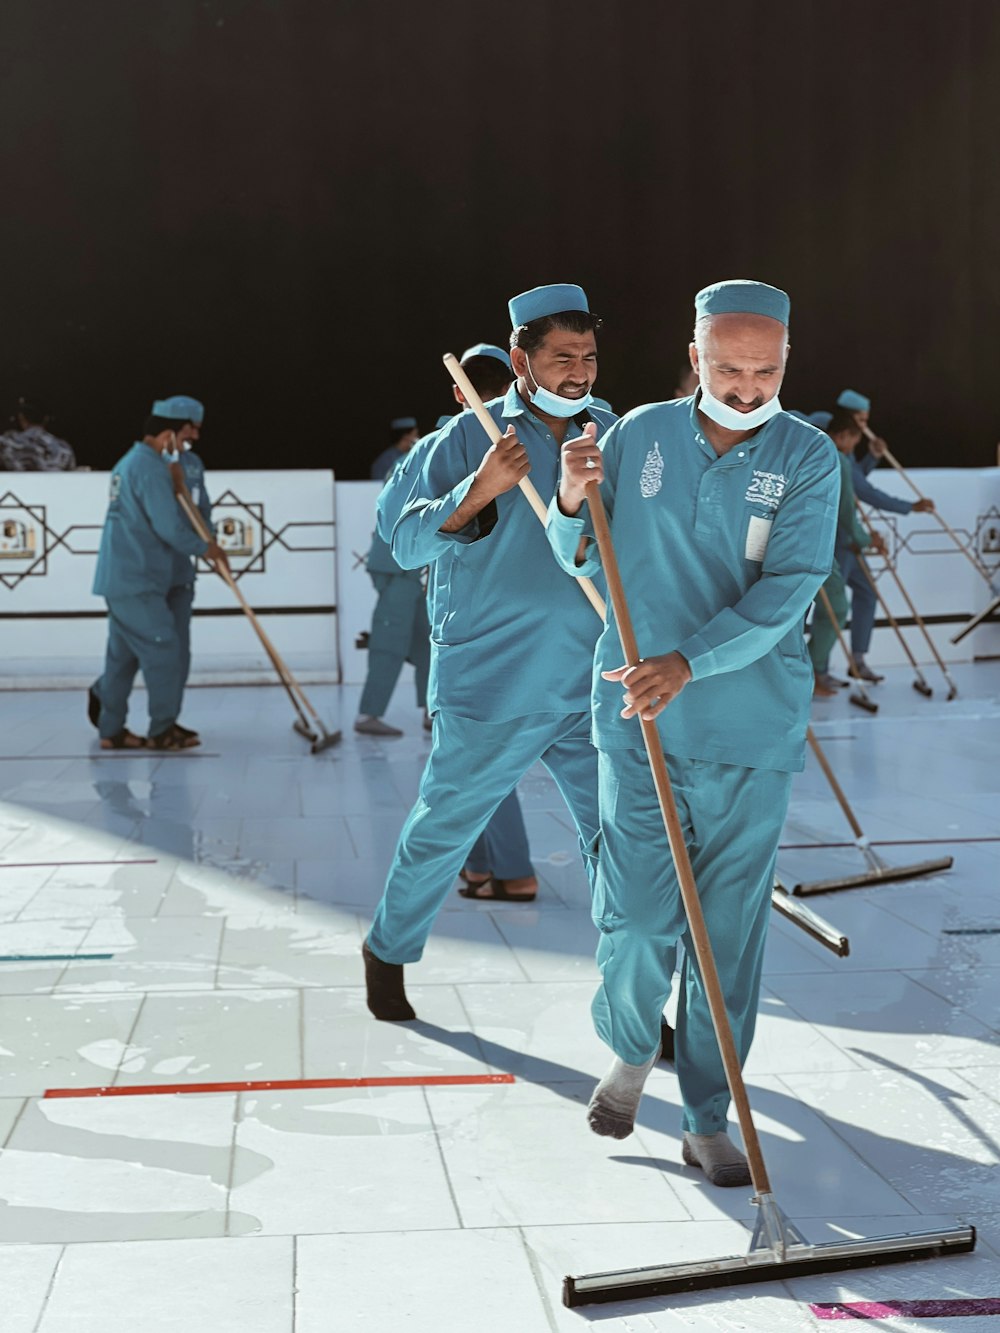 a group of men in blue uniforms with brooms